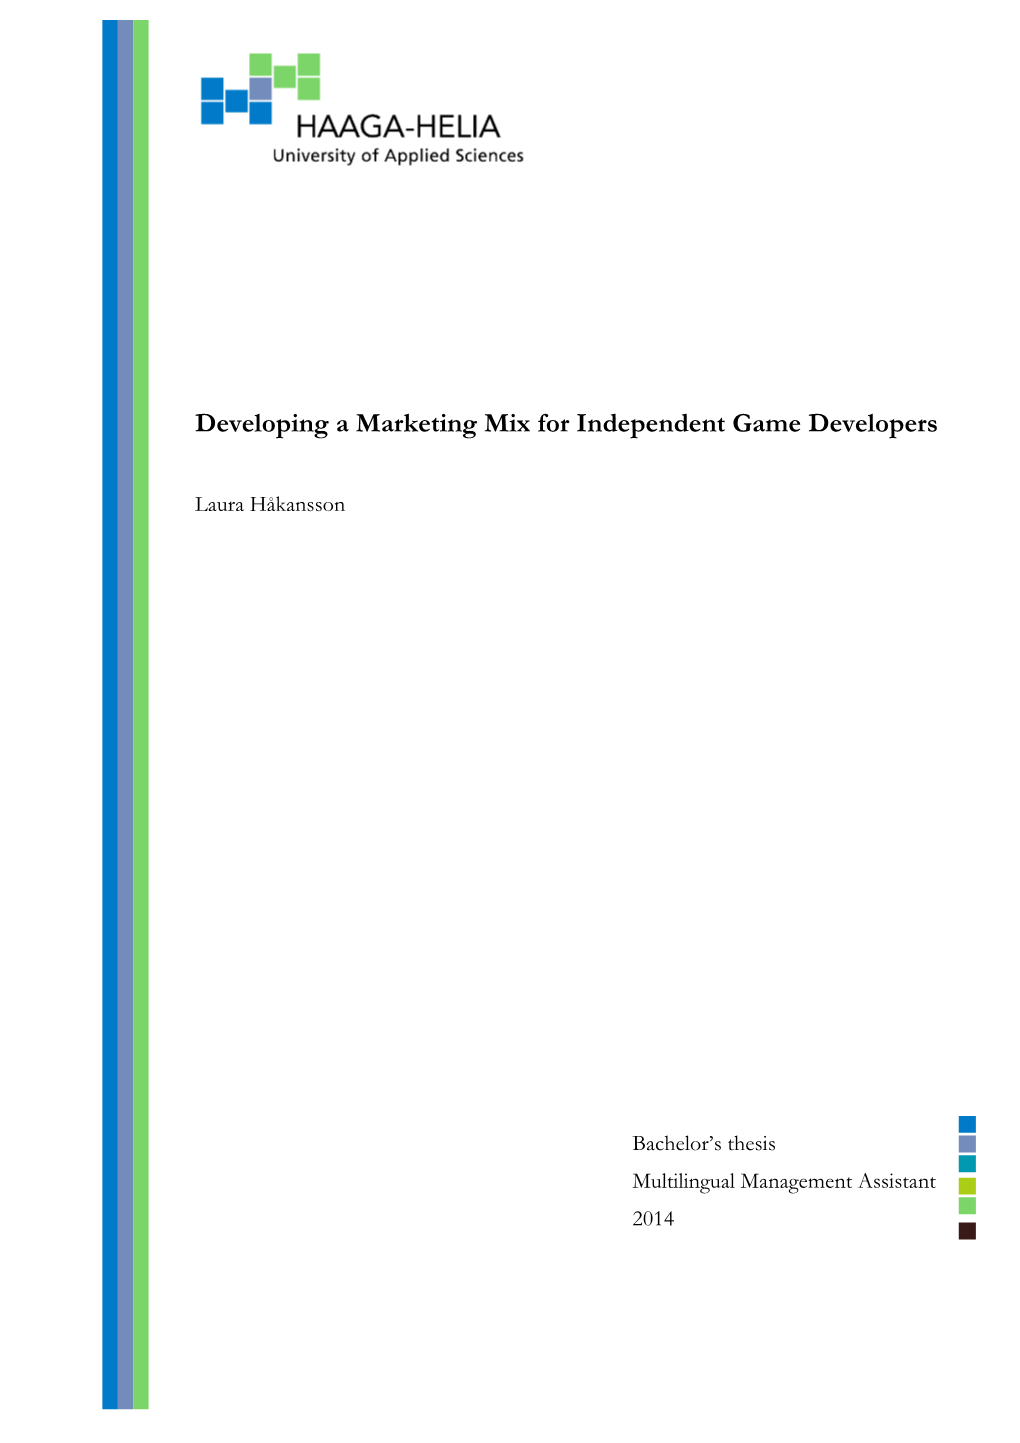 Developing a Marketing Mix for Independent Game Developers